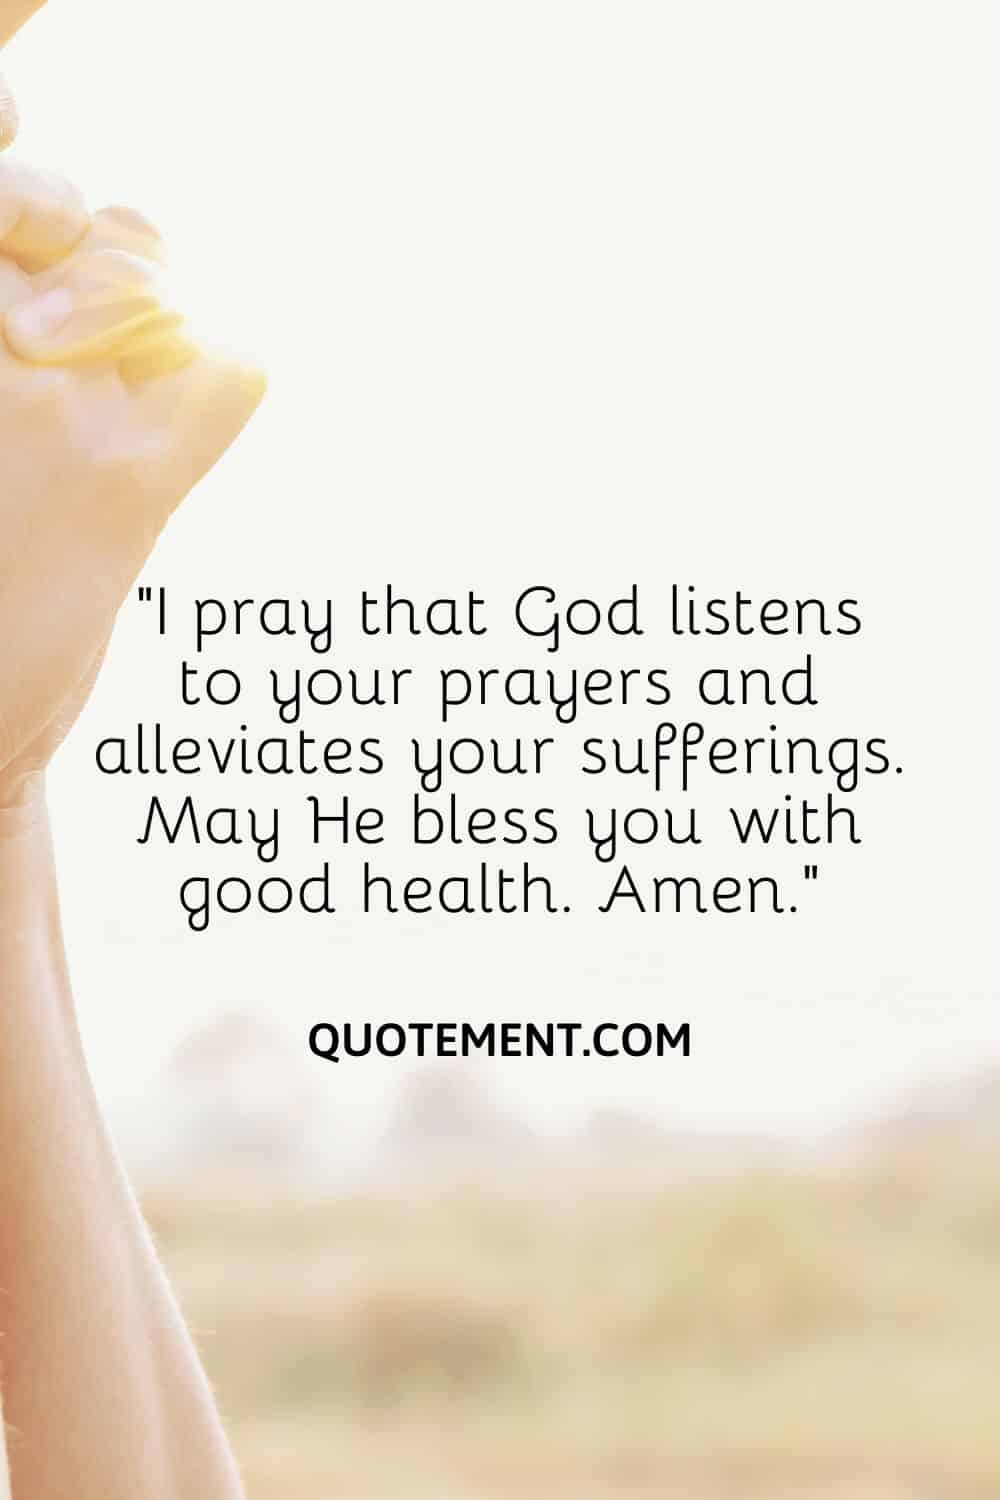 “I pray that God listens to your prayers and alleviates your sufferings. May He bless you with good health. Amen.”